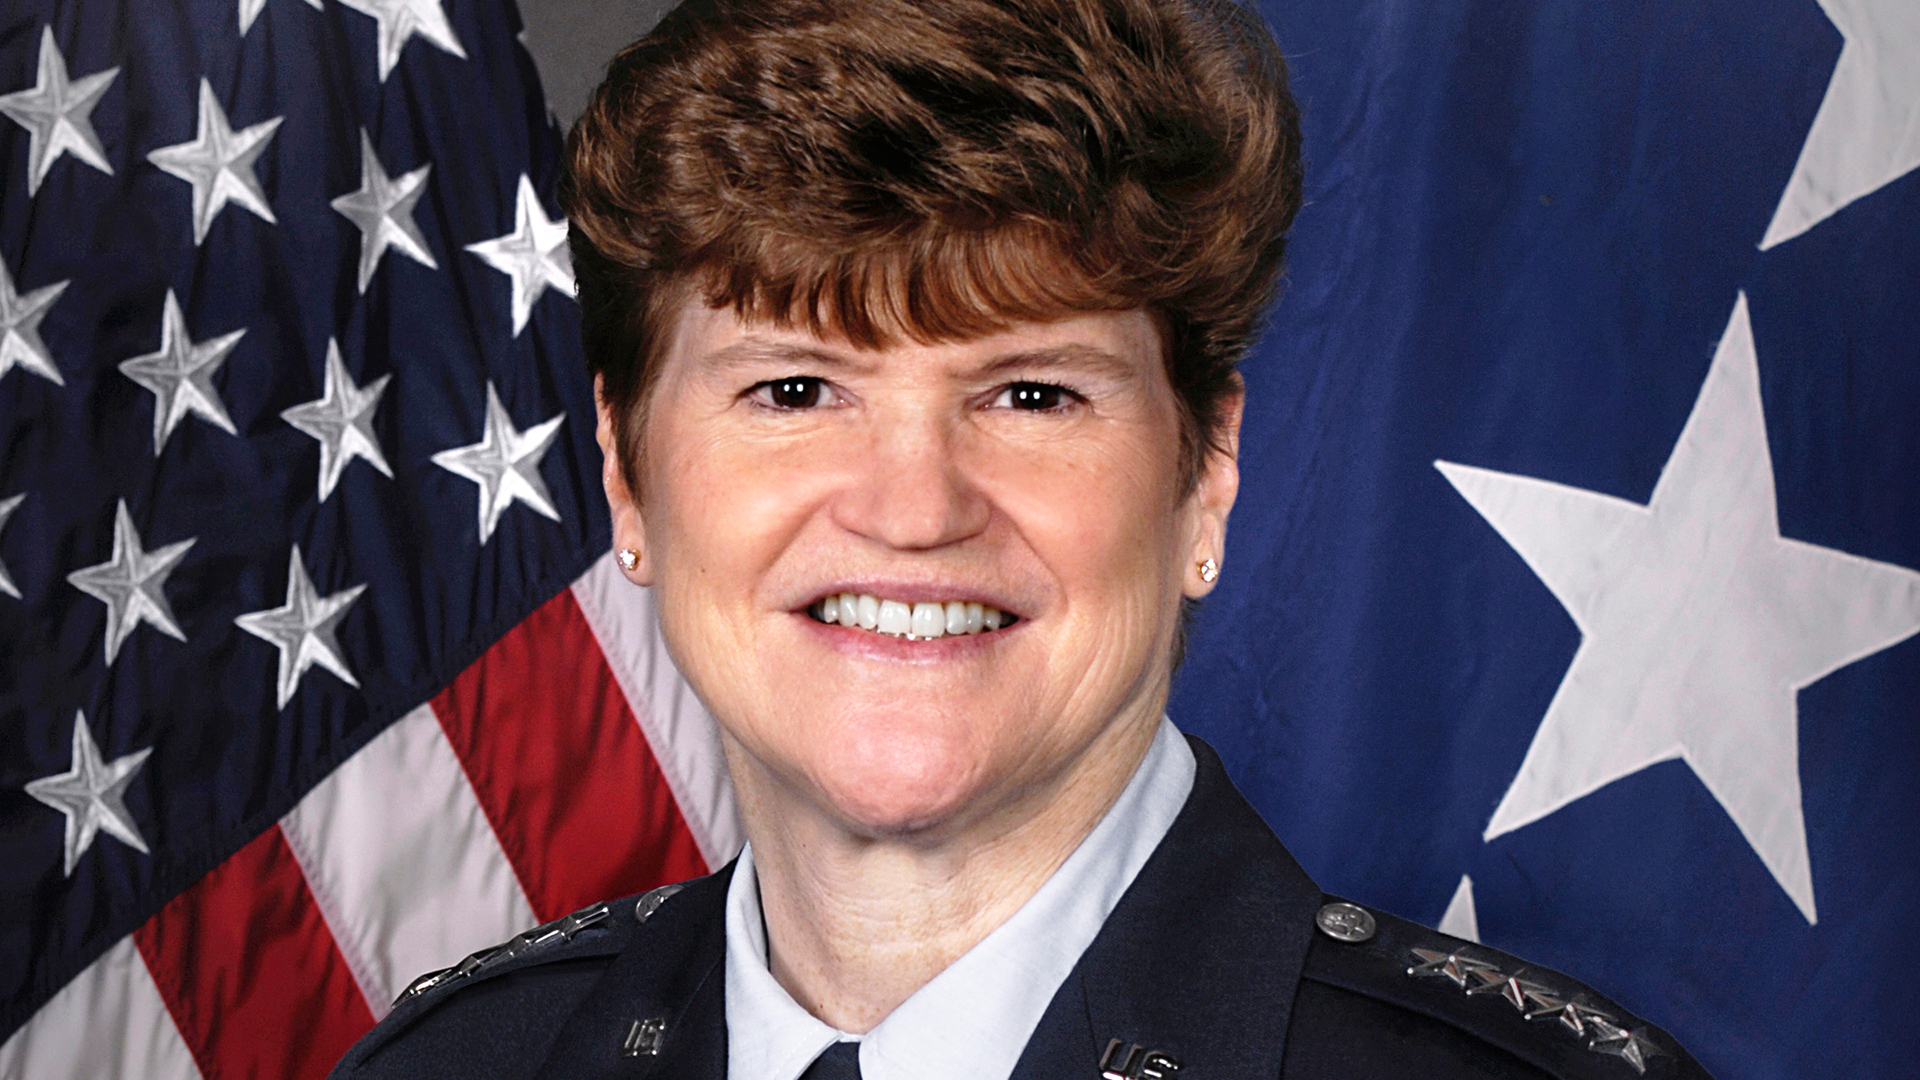 June 28, 1976: Janet C. Wolfenbarger and 156 Other Women Became the First Female Cadets in the United States Air Force Academy